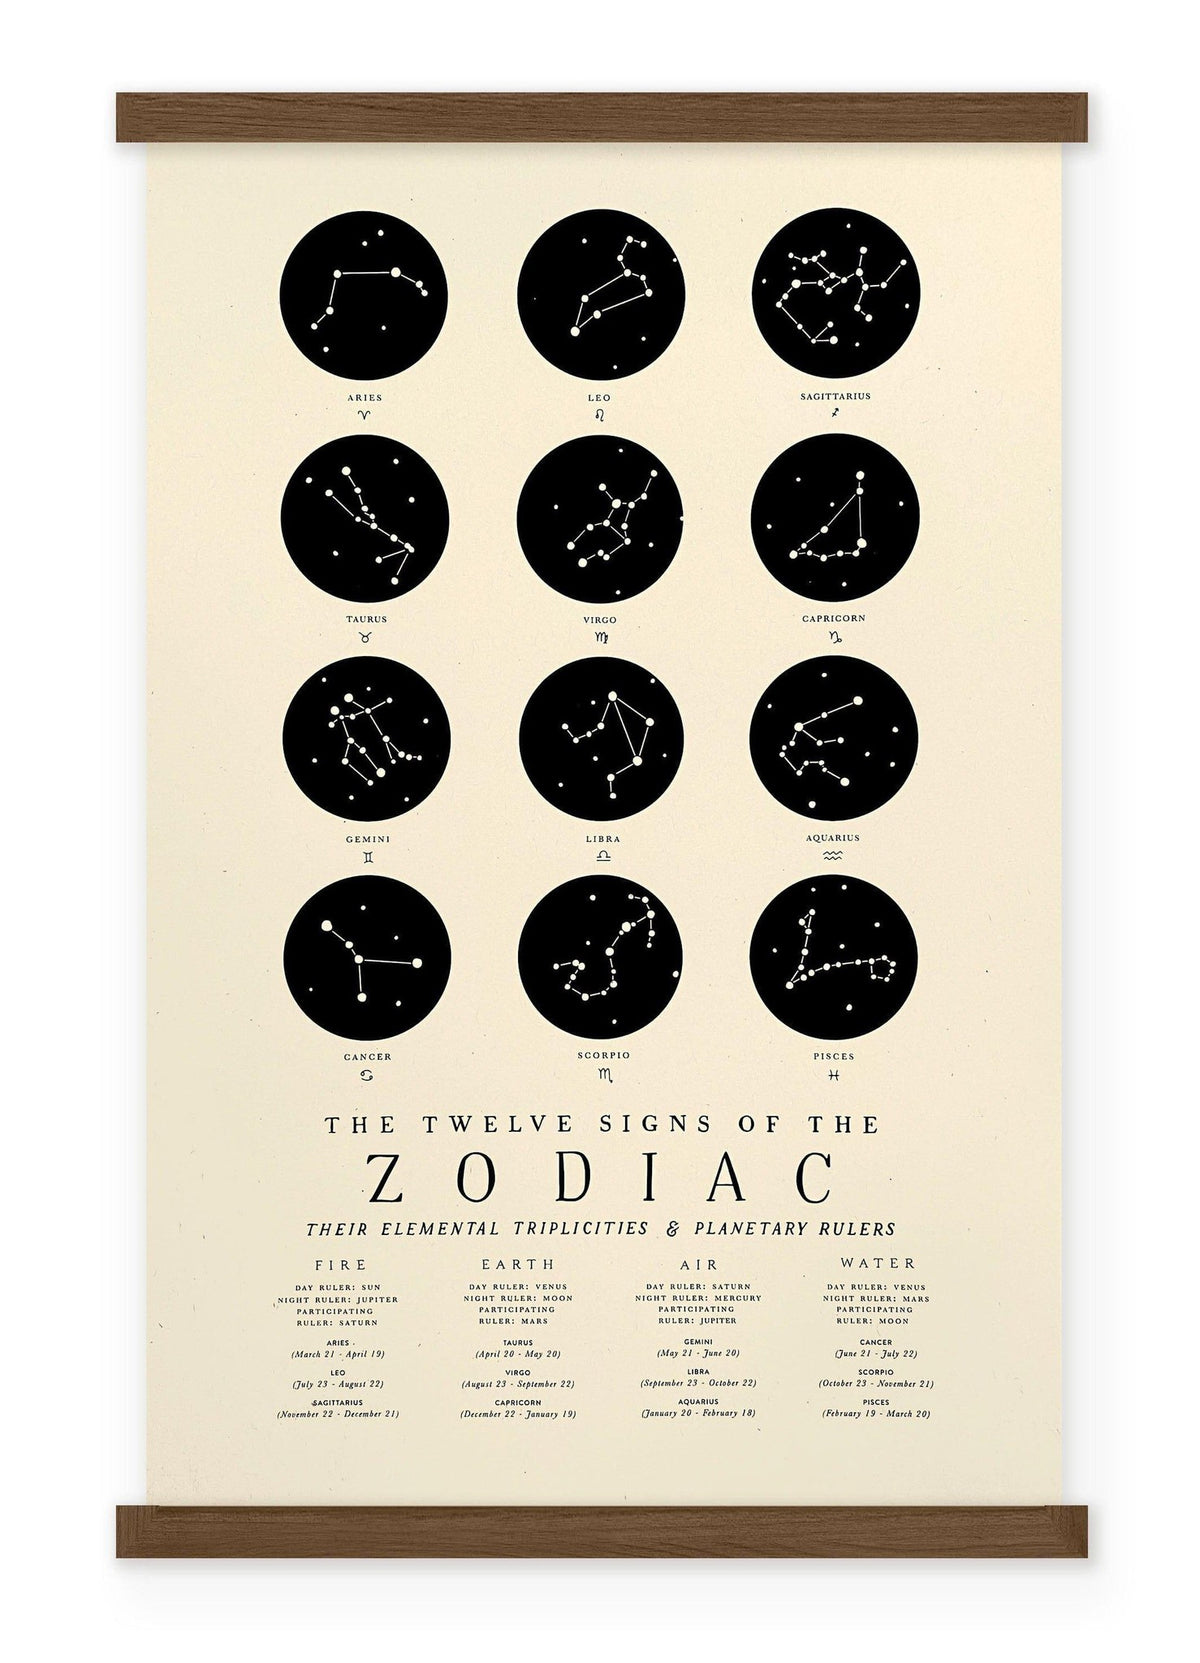 The Zodiac Constellations 11x17 print by The Wild Wander.